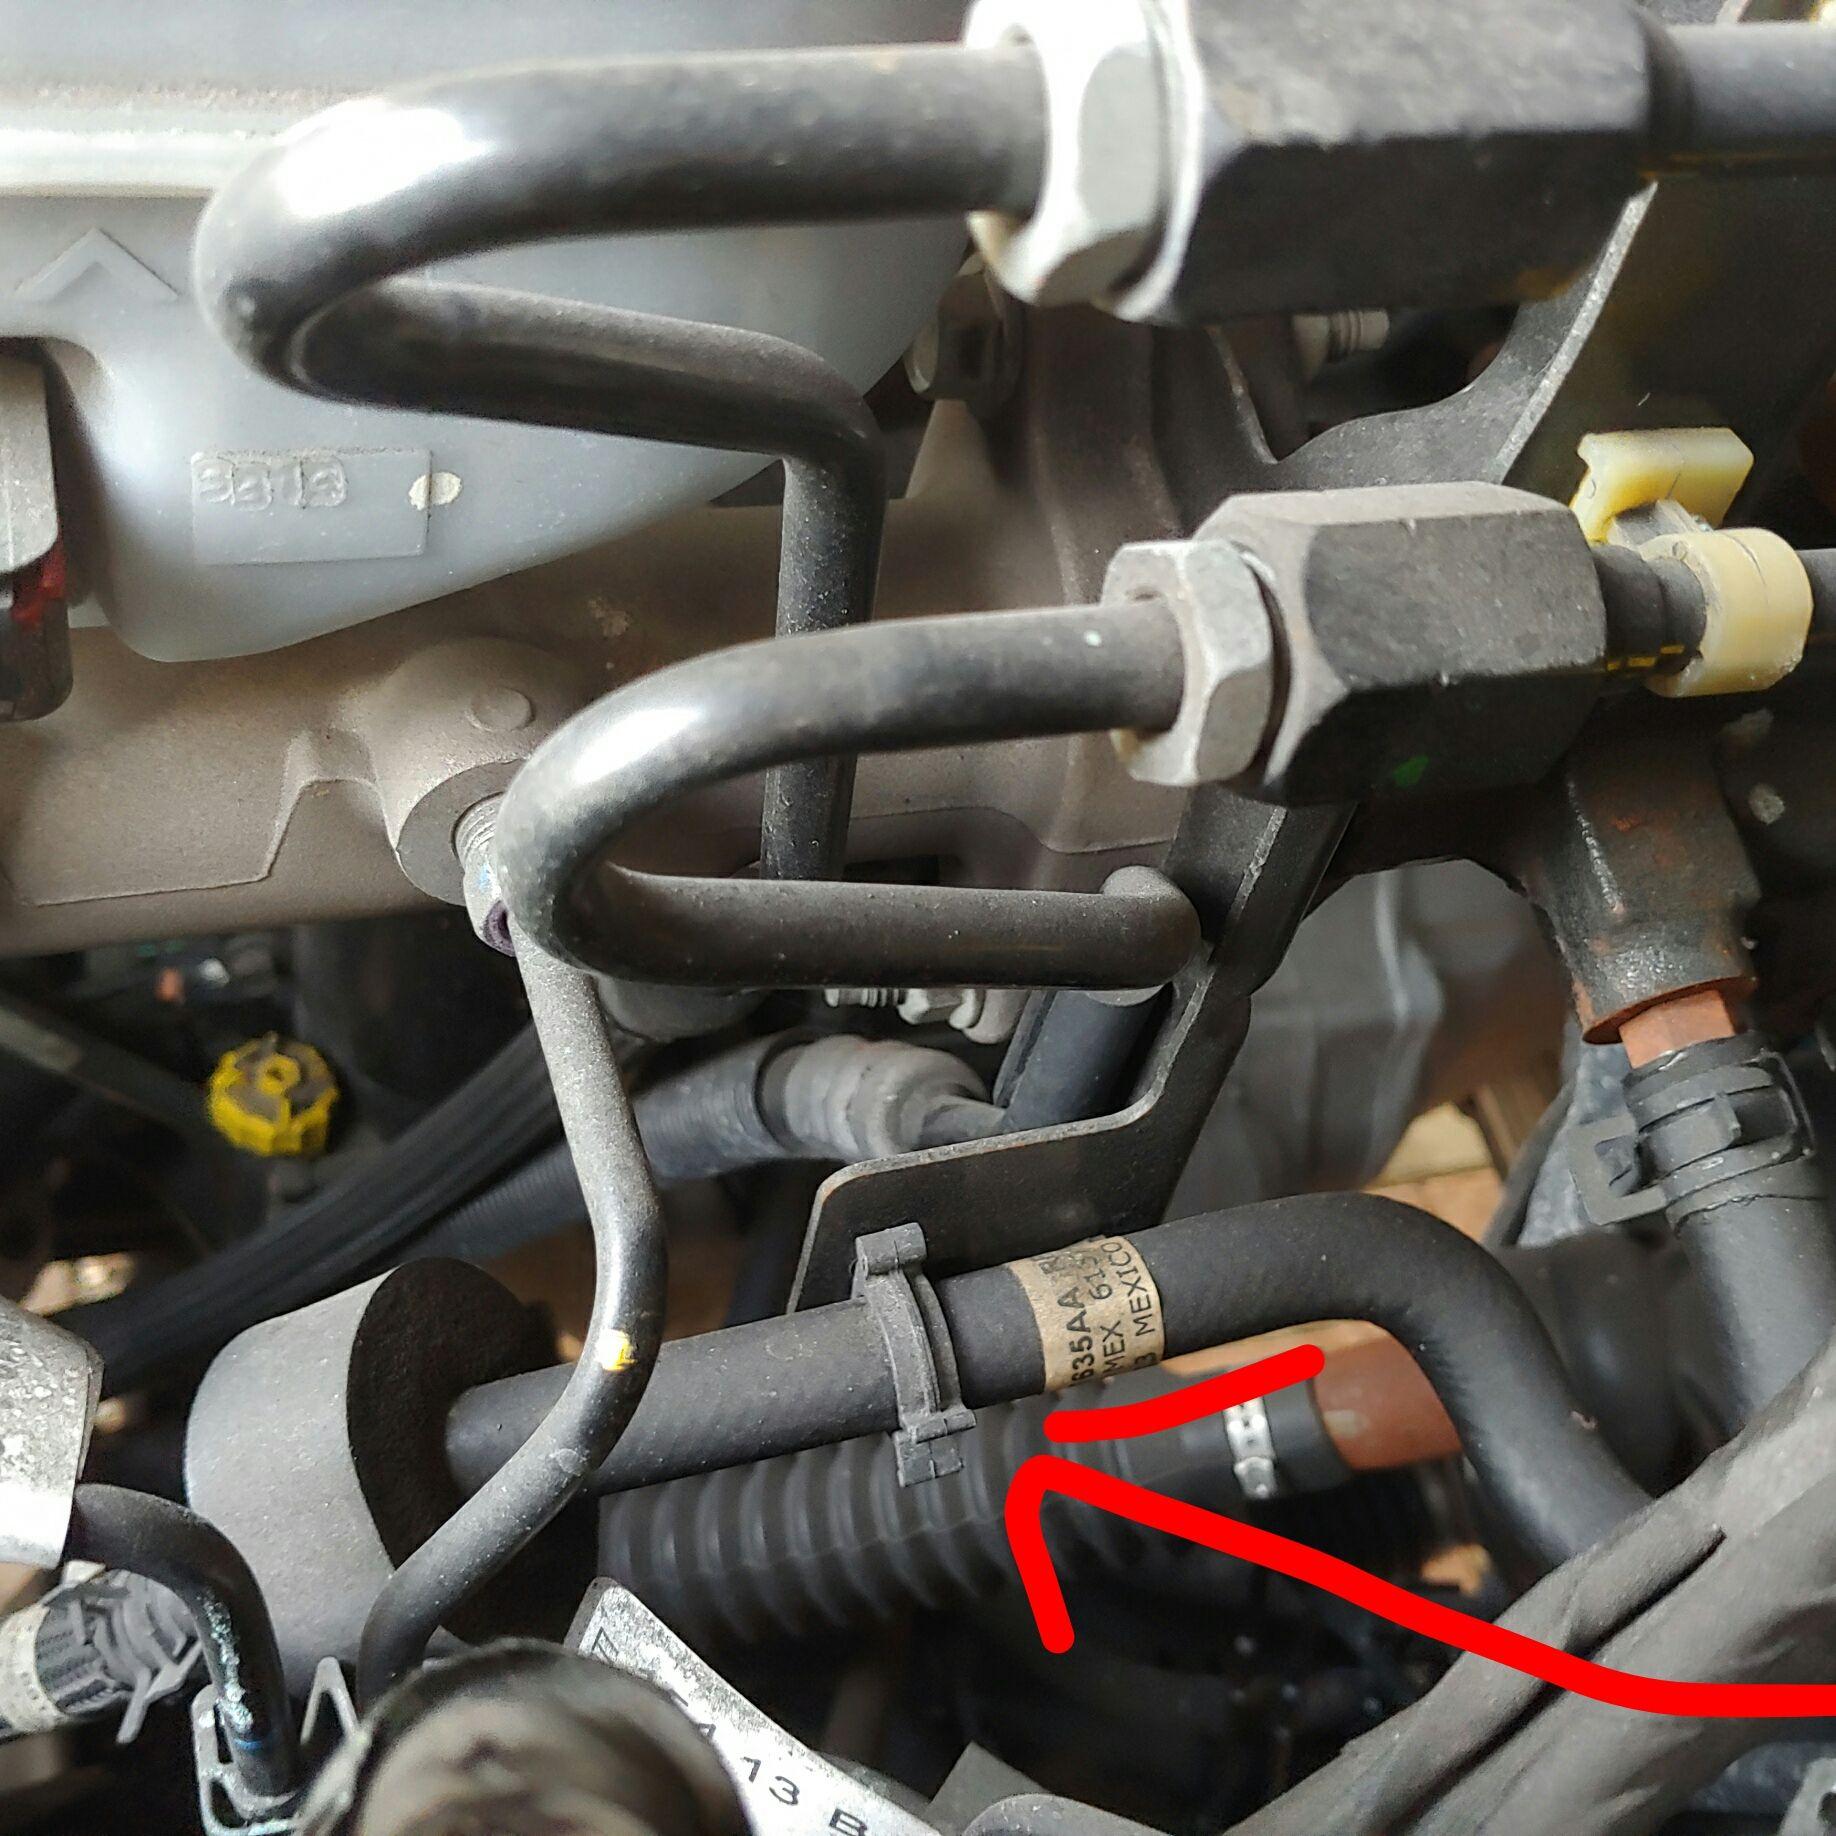 You might want to check this line power steering line for rubbing ...